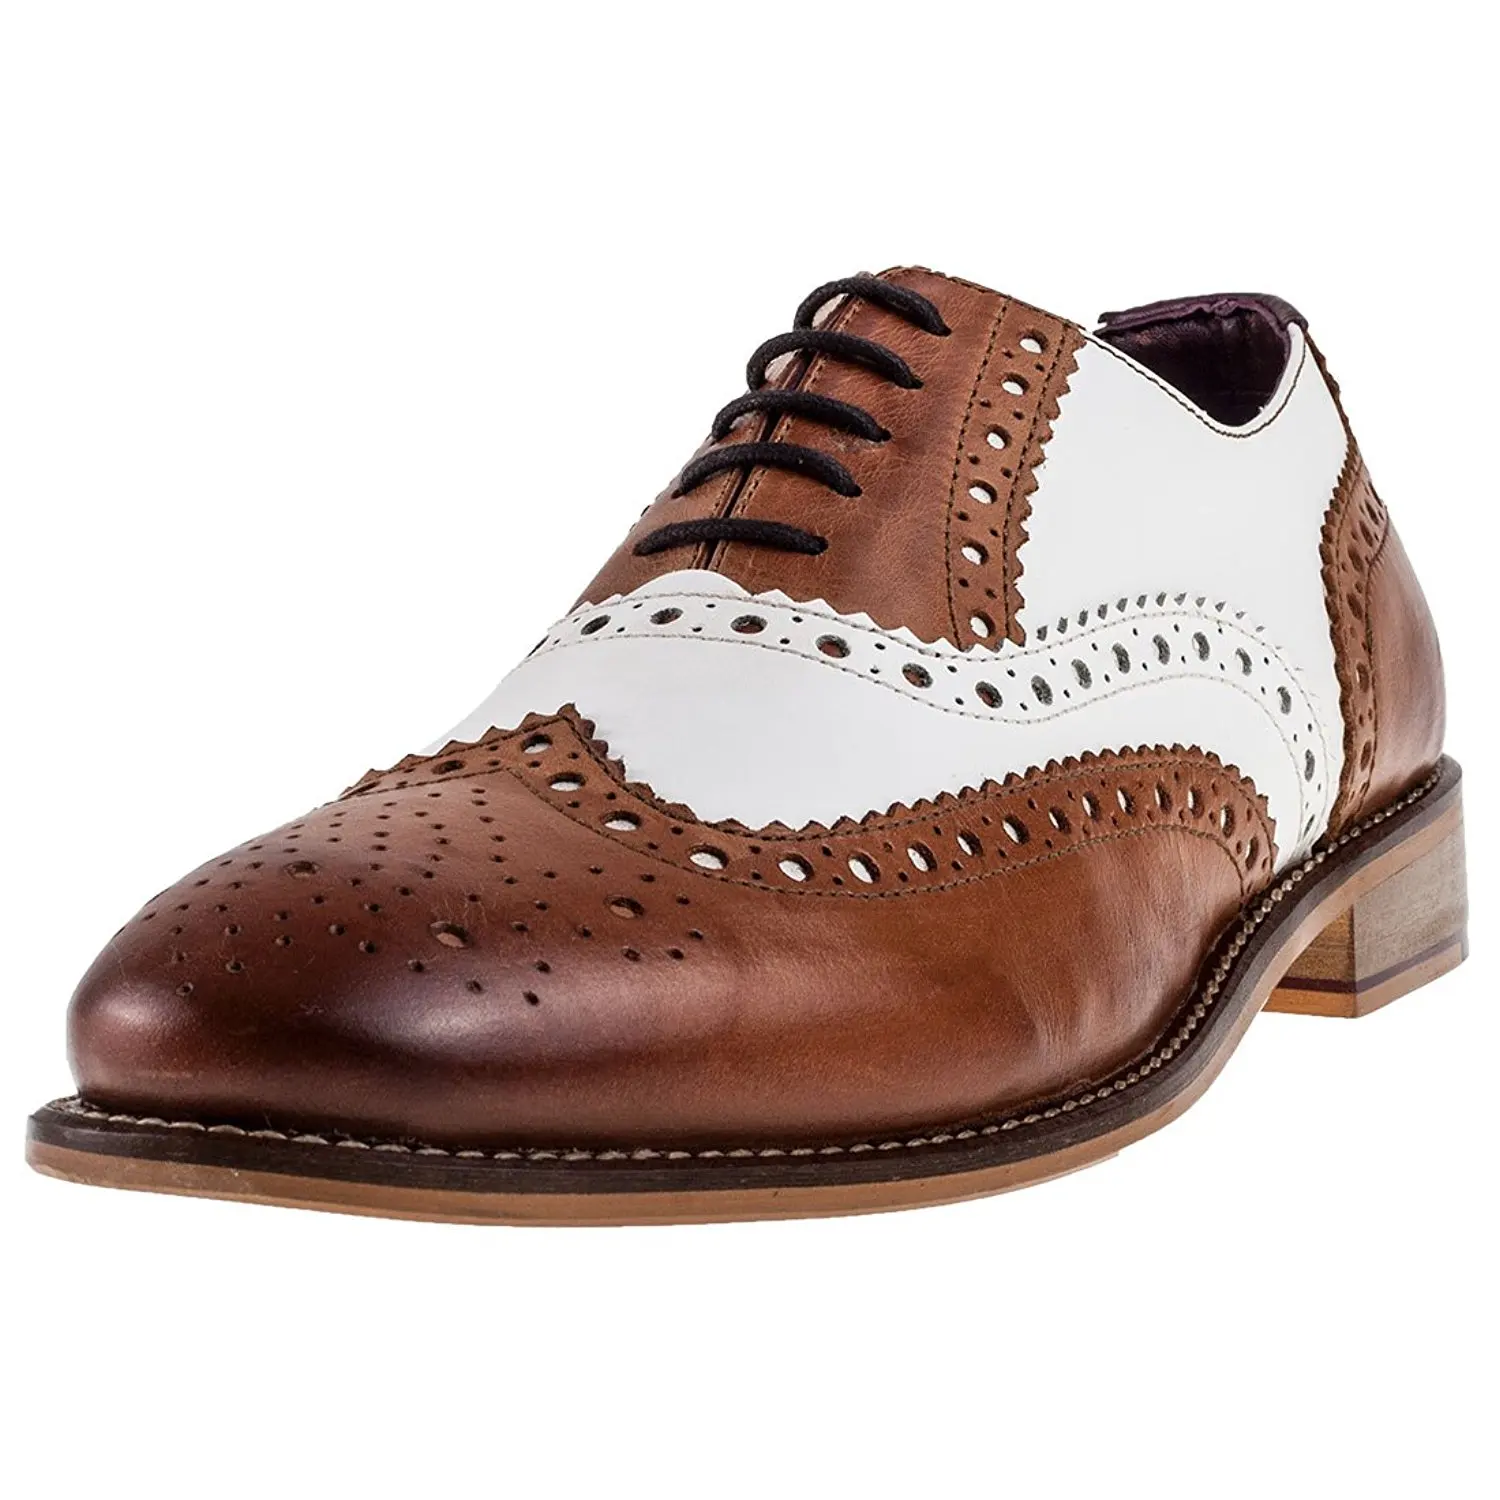 Cheap Mens Two Tone Brogues, find Mens Two Tone Brogues deals on line ...